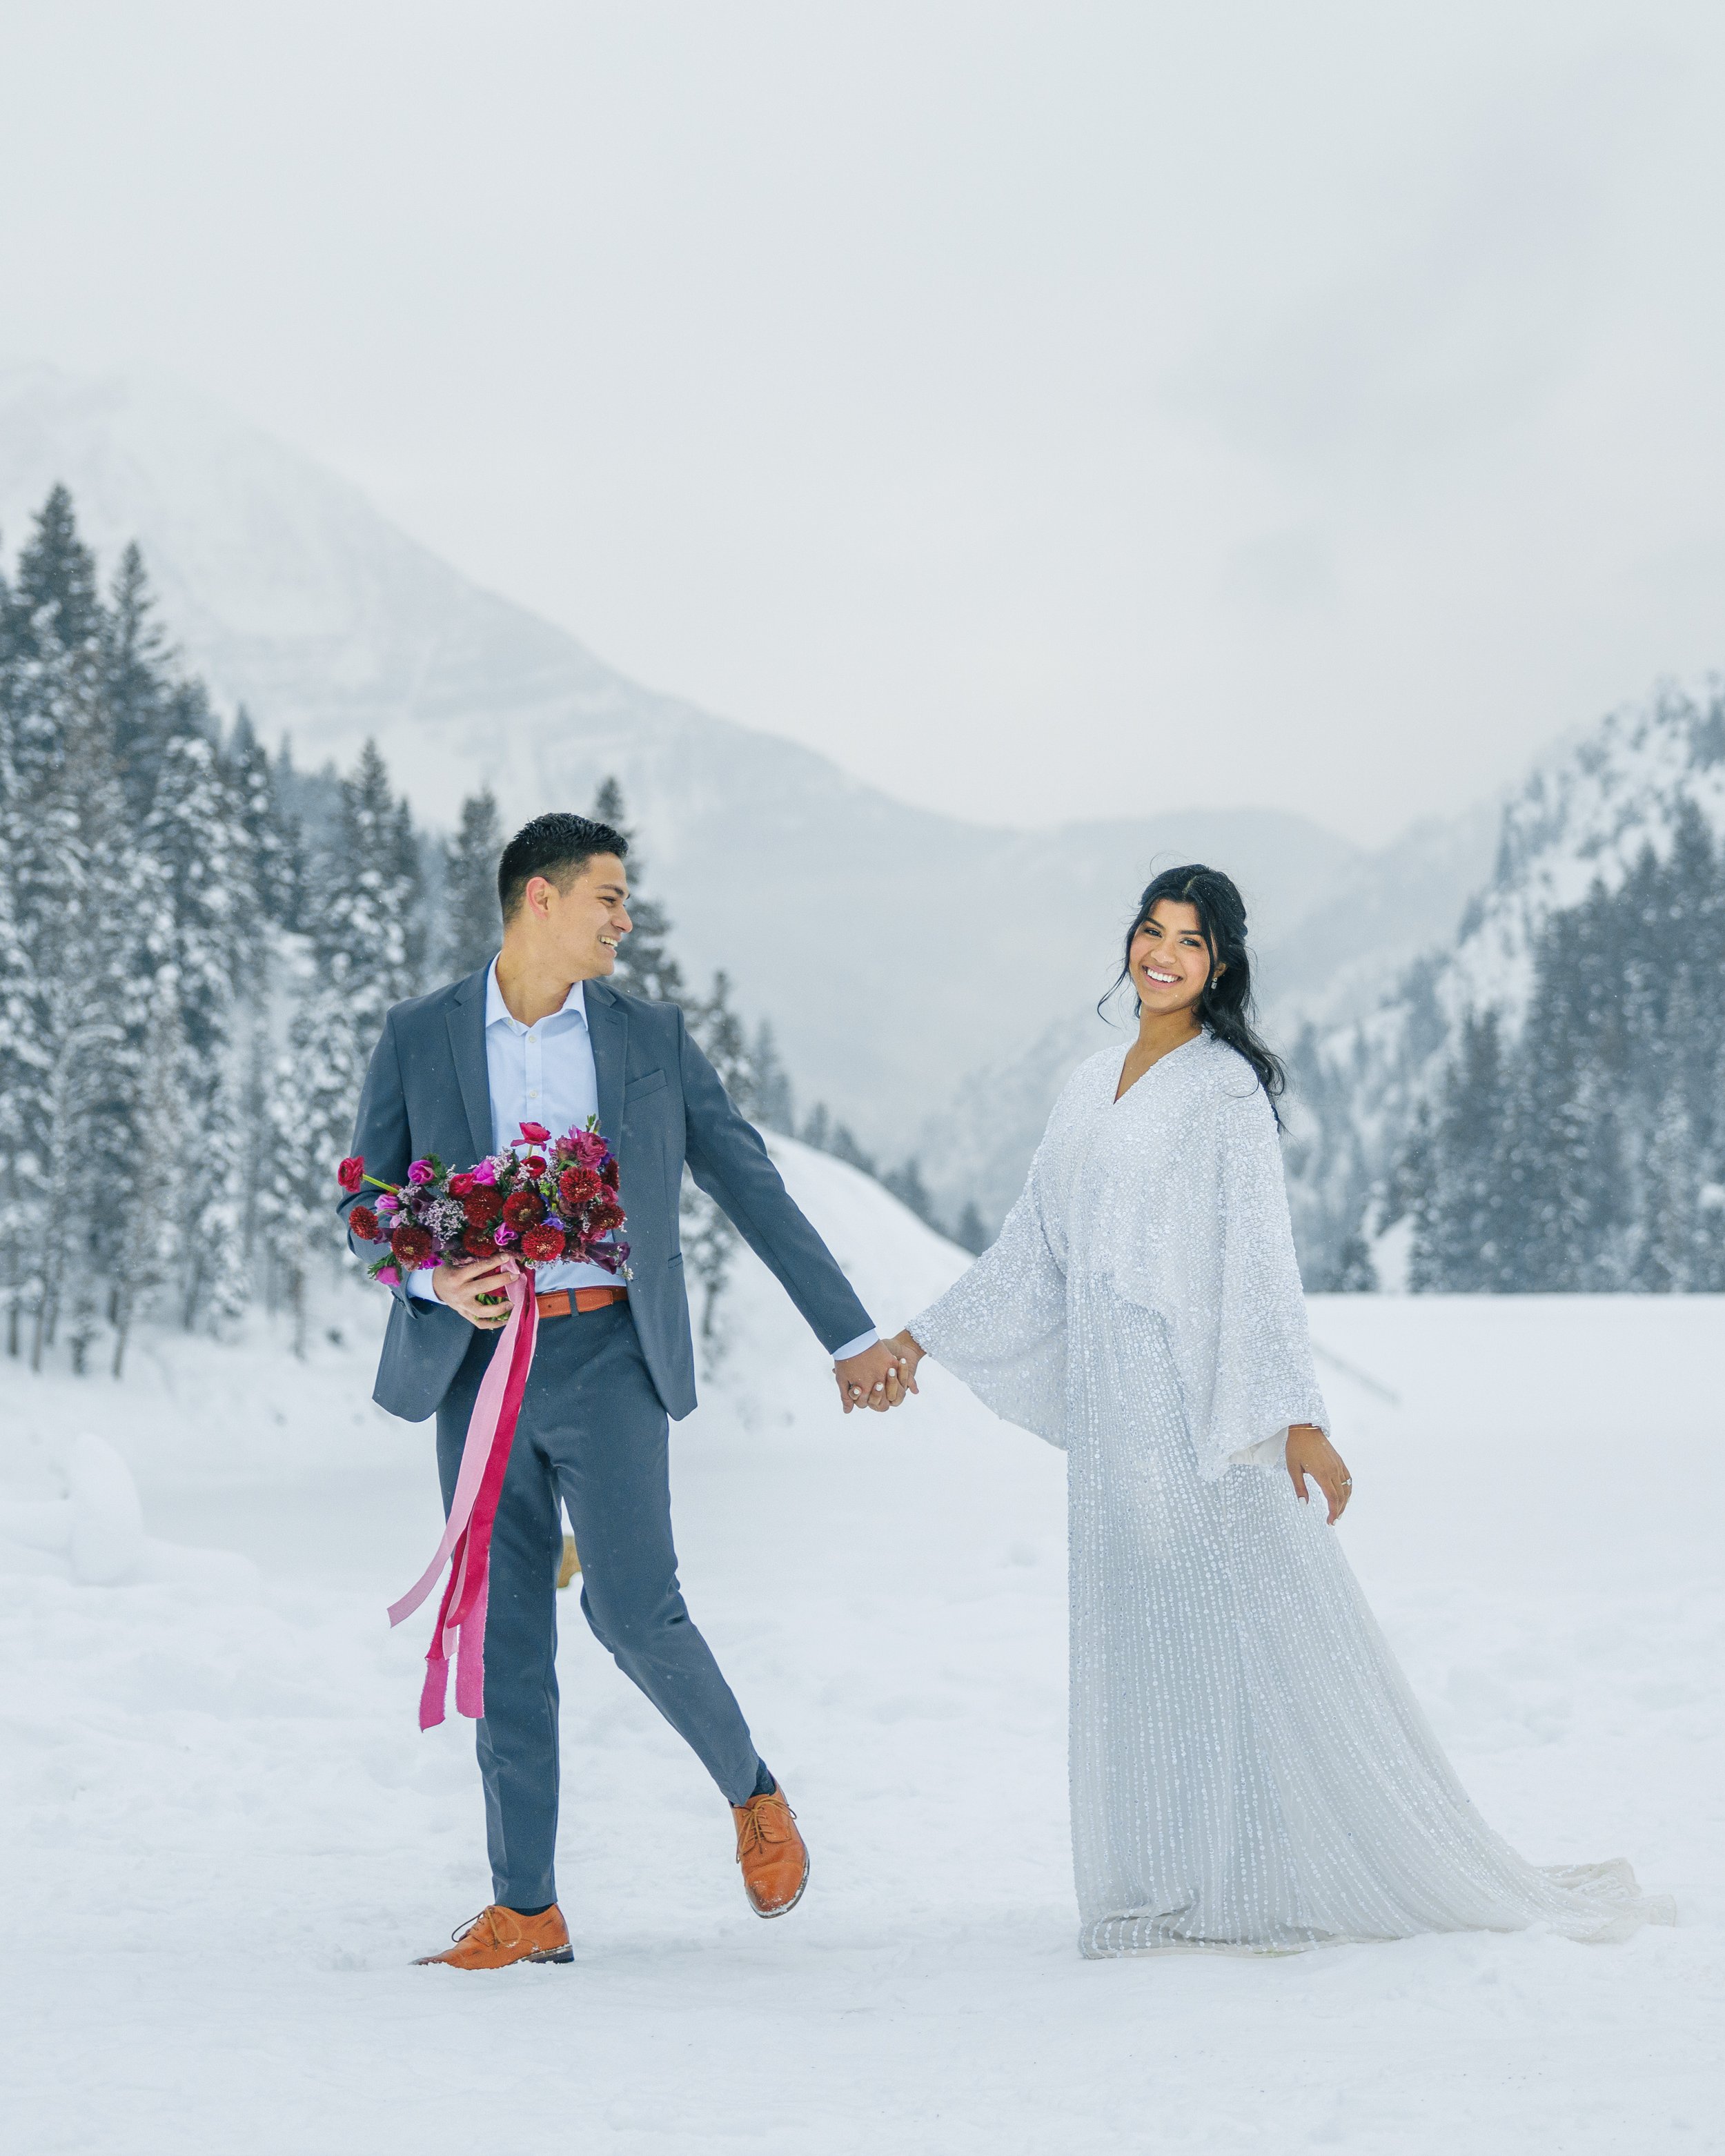  A groom leads his bride along the snowy mountain pass by Savanna Richardson Photography. winter wedding inspiration #SavannaRichardsonPhotography #SavannaRichardsonBridals #WinterBridals #WinterWedding #TibbleForkBridals #UtahBridals #MountainBridal